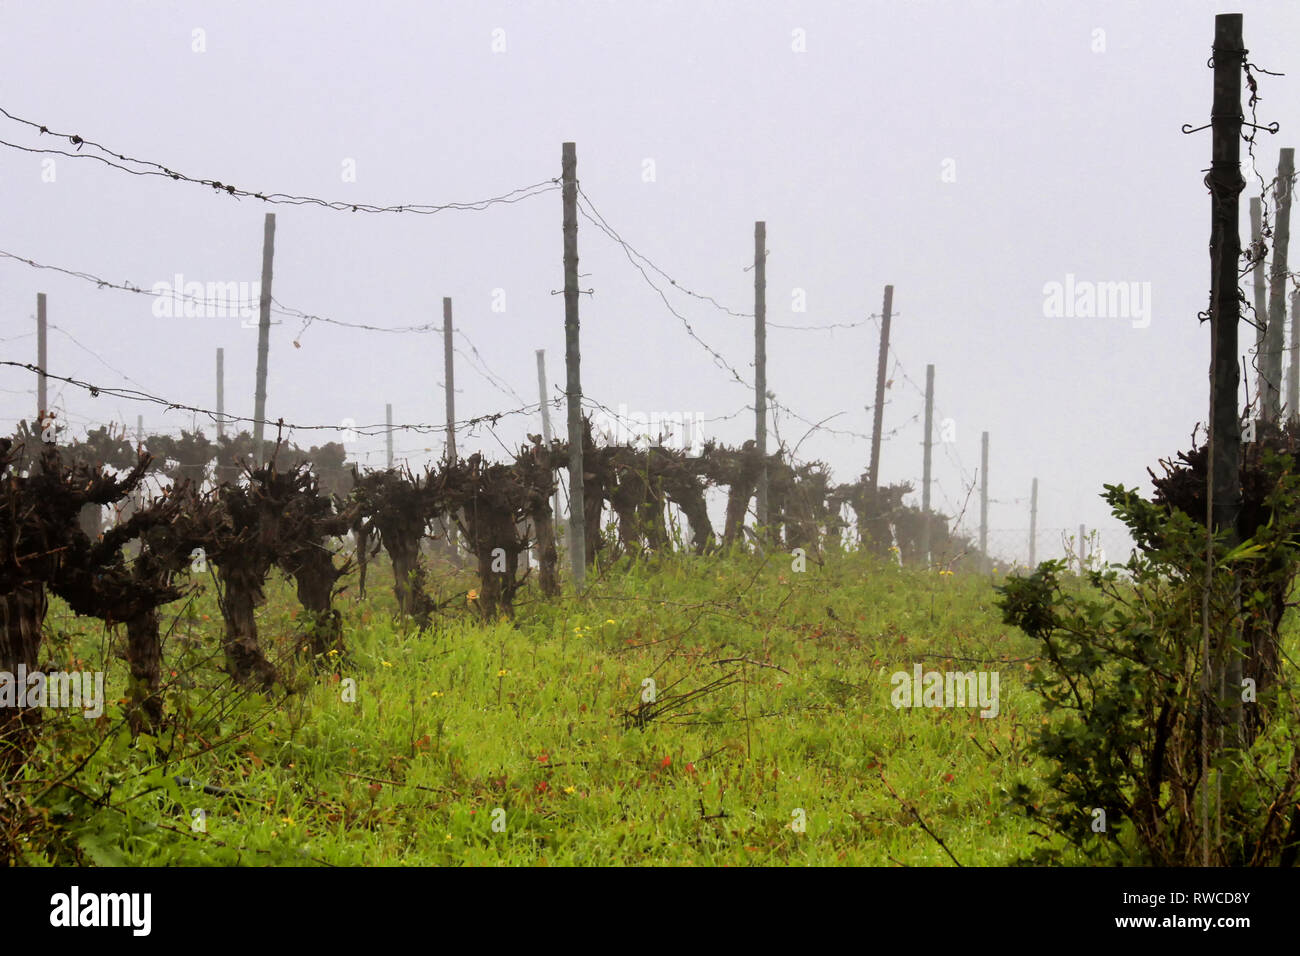 Rows of grape vines sit dormant in a heavy fog in Katzrin's Golan Heights Winery vineyard in Israel. Stock Photo